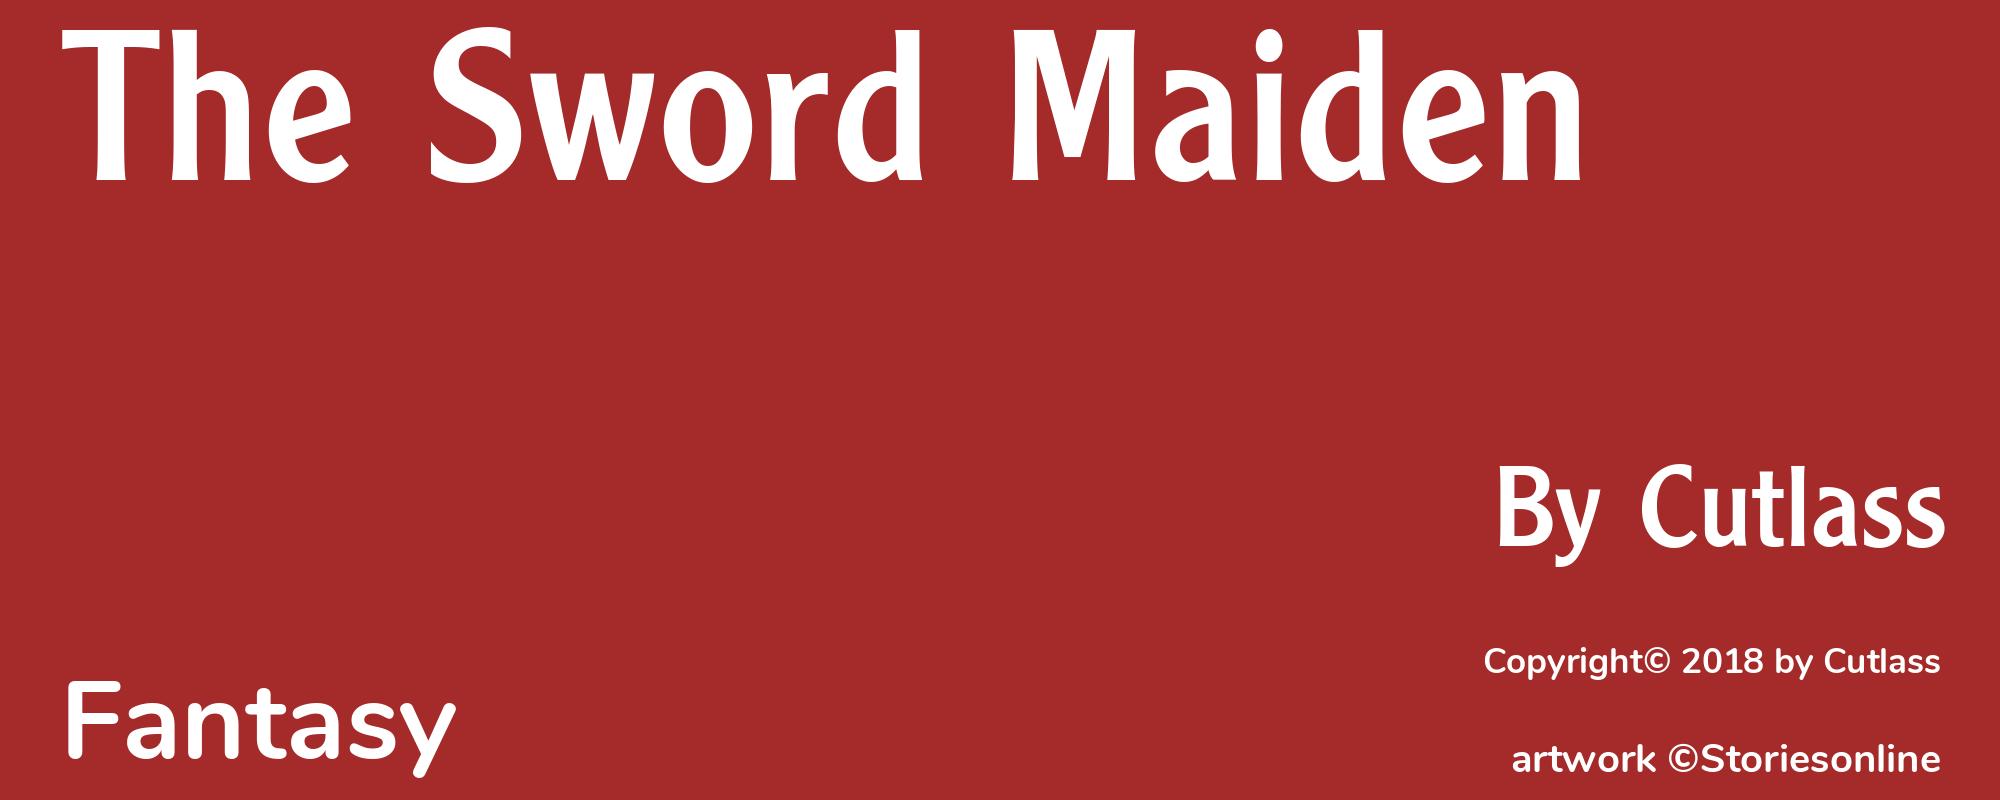 The Sword Maiden - Cover